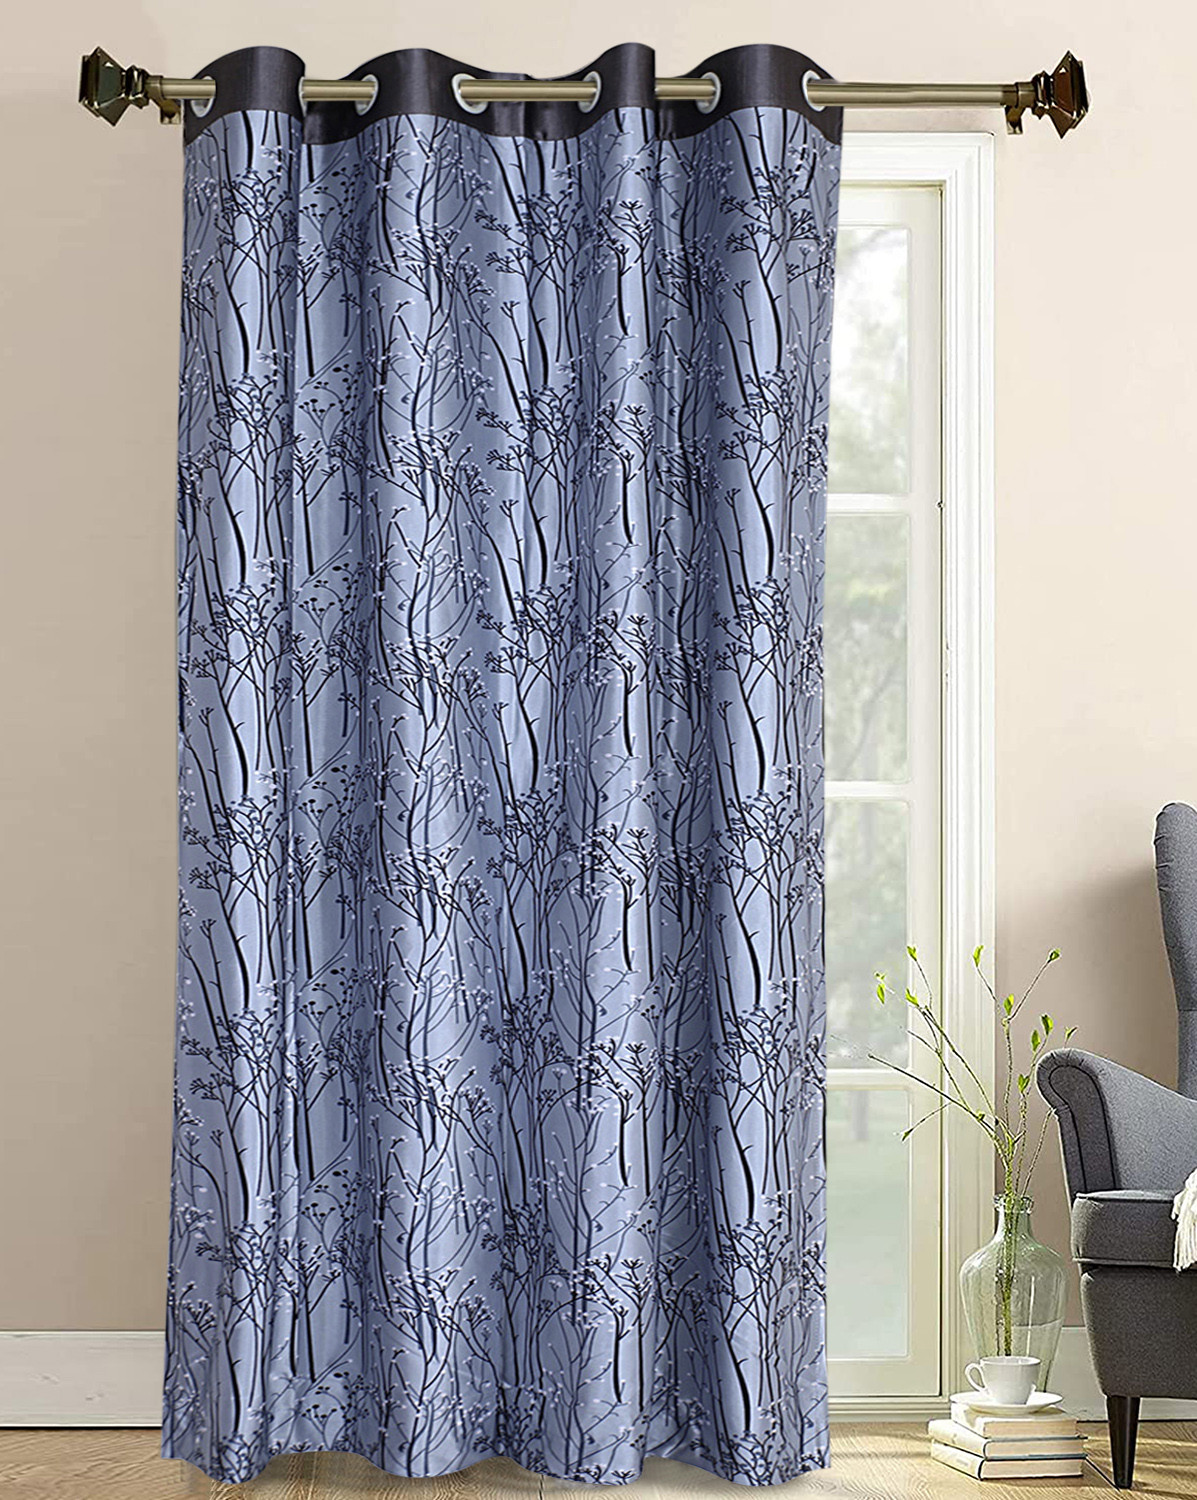 Kuber Industries Polyester Decorative 9 Feet Long Door Curtain|Tree Branches Print Blackout Drapes Curatin With 8 Eyelet For Home & Office (Gray)